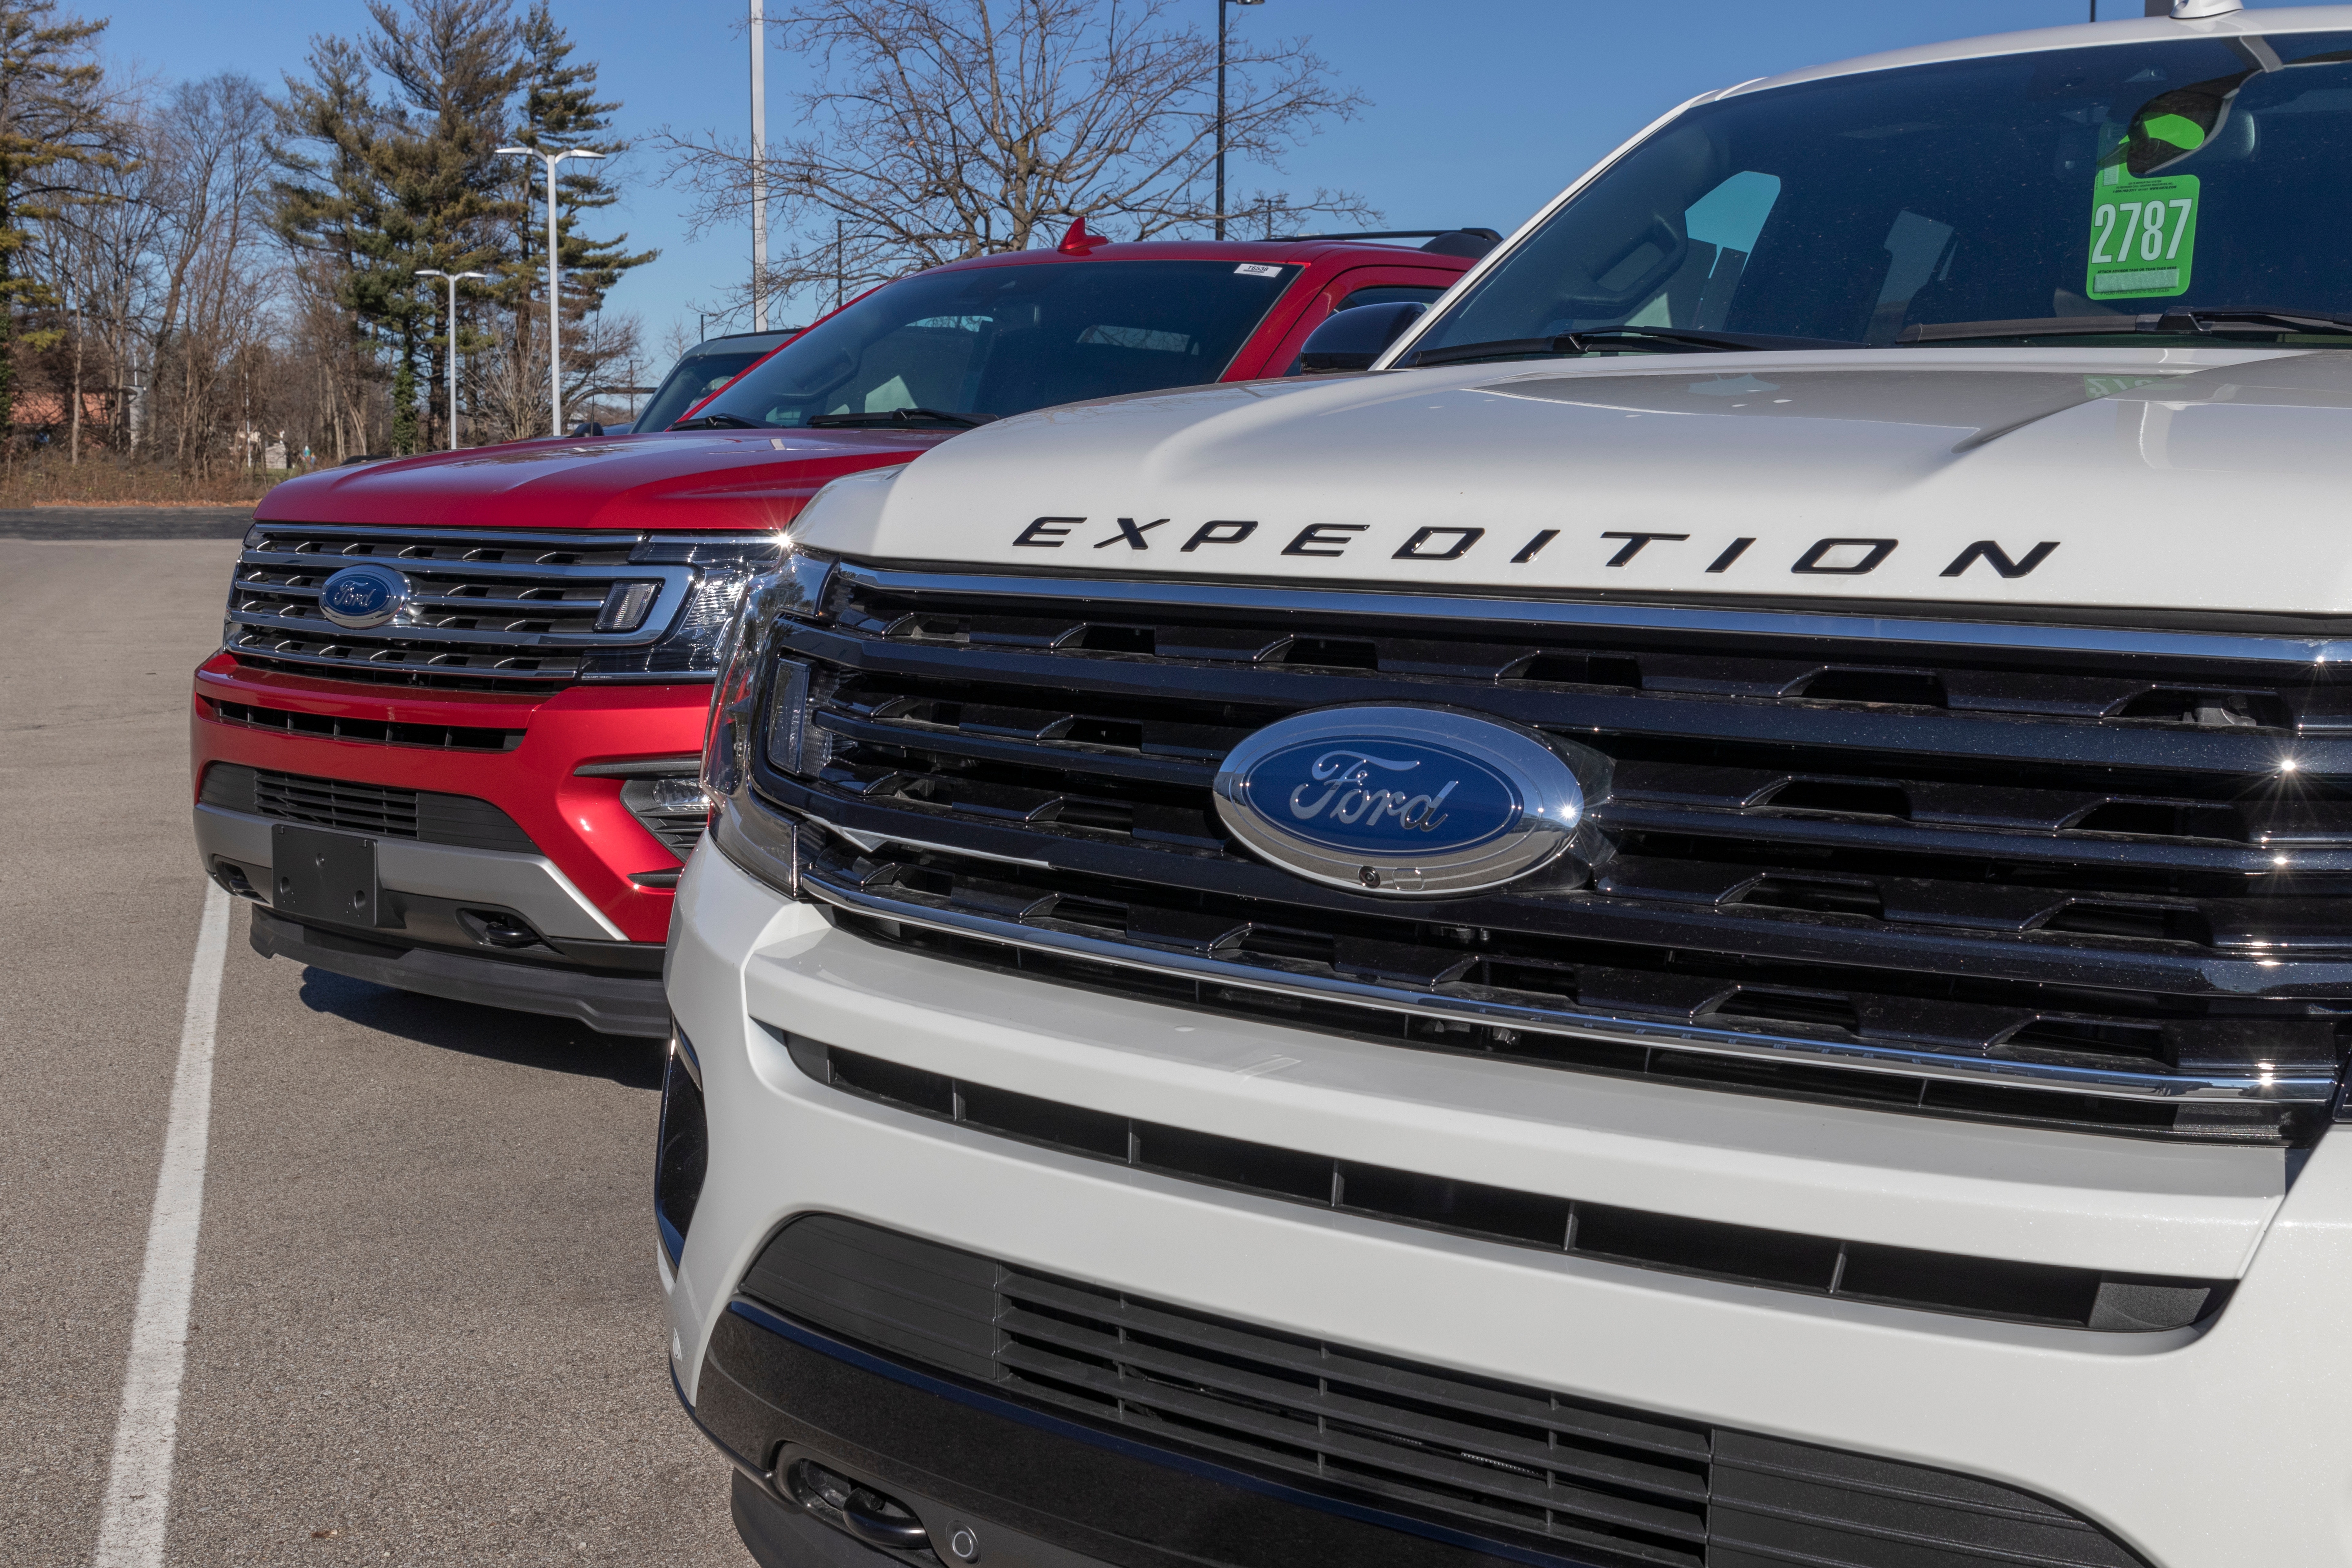 Ford Recalls Over 39,000 Expedition, Navigator SUVs Over Fire Risk, One Injury